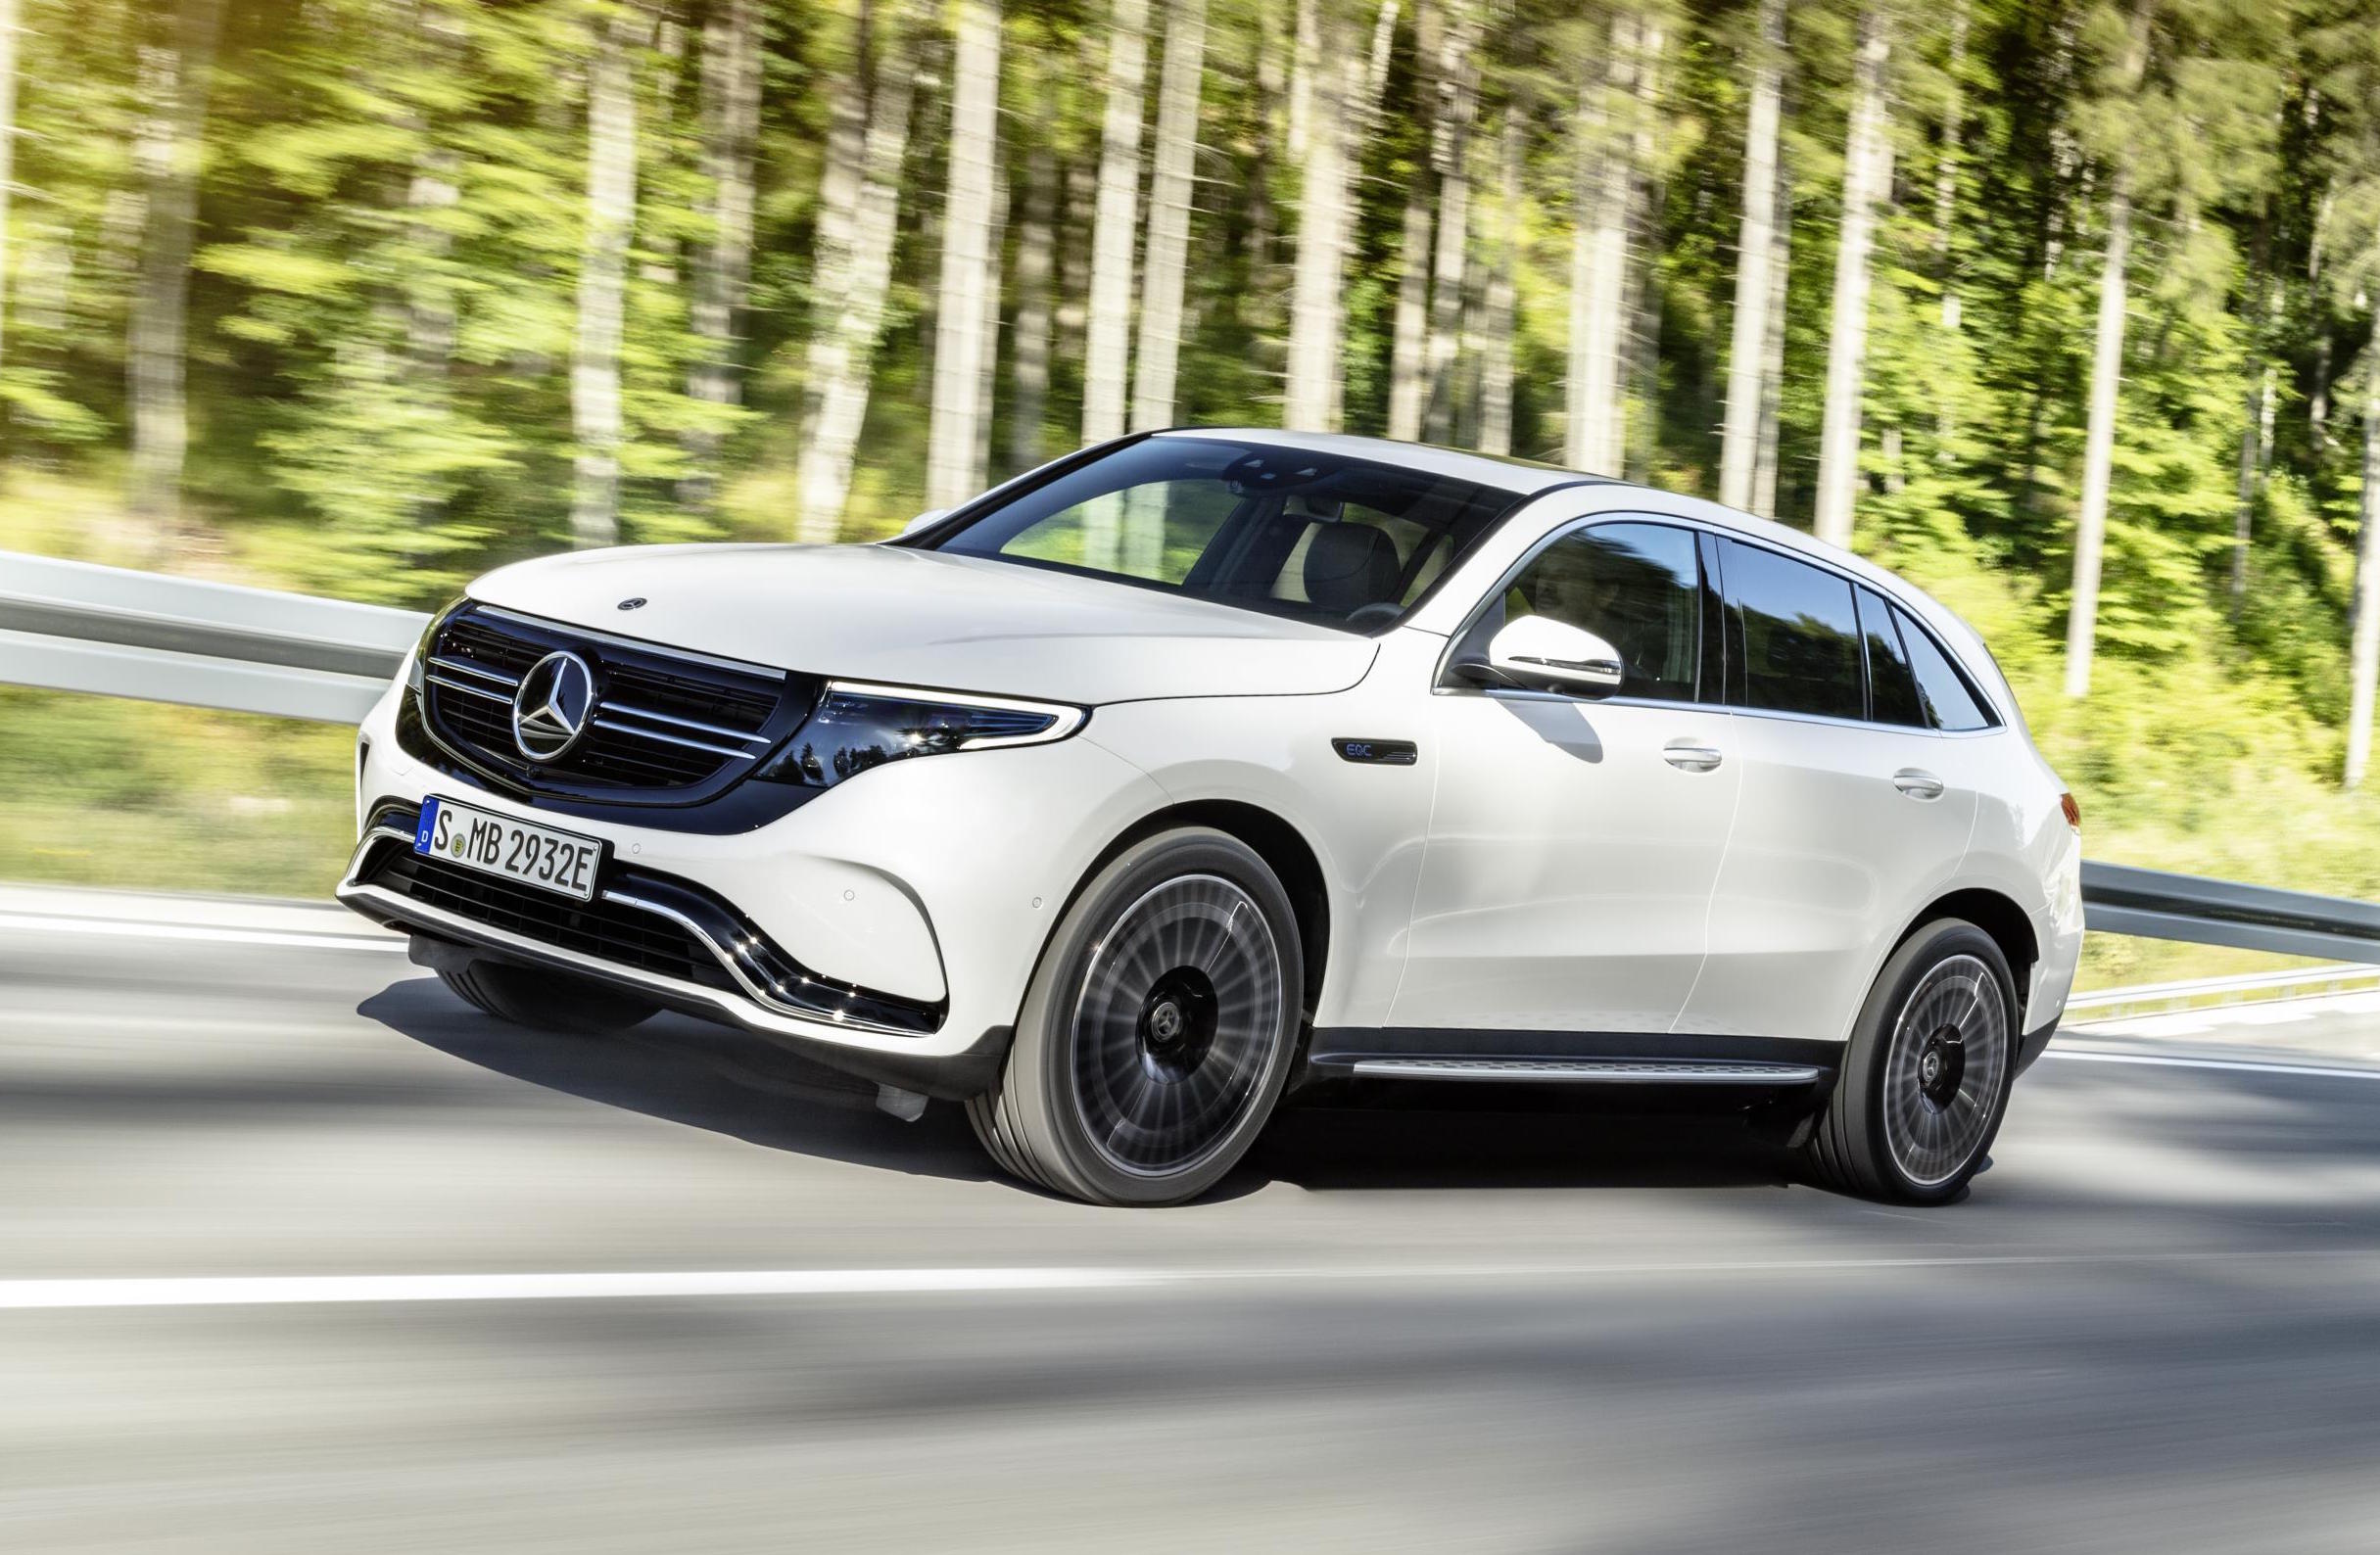 Mercedes-Benz EQC unveiled, new electric mid-size SUV